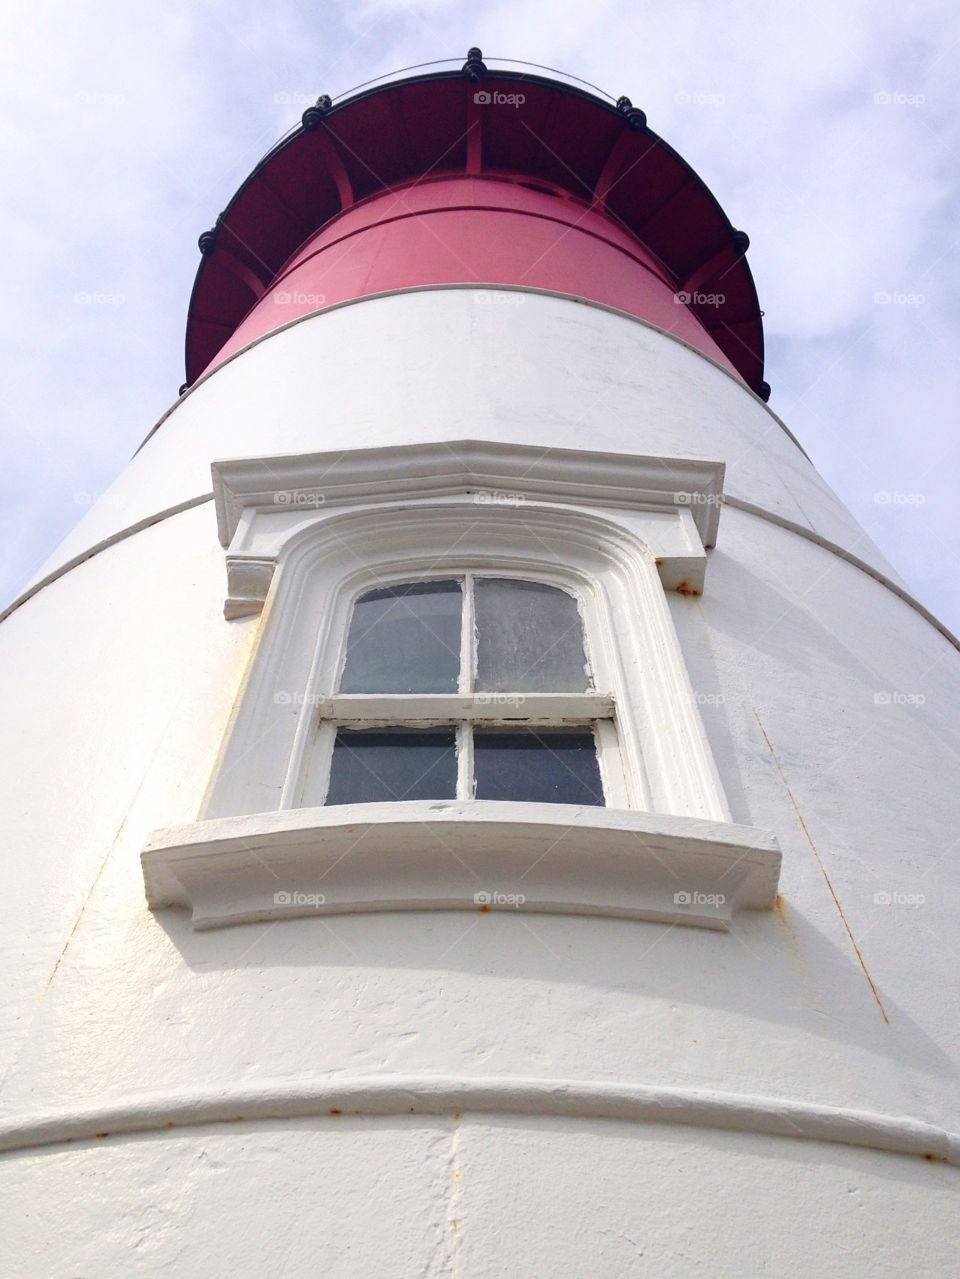 A single window in the lighthouse - windows around the world mission
